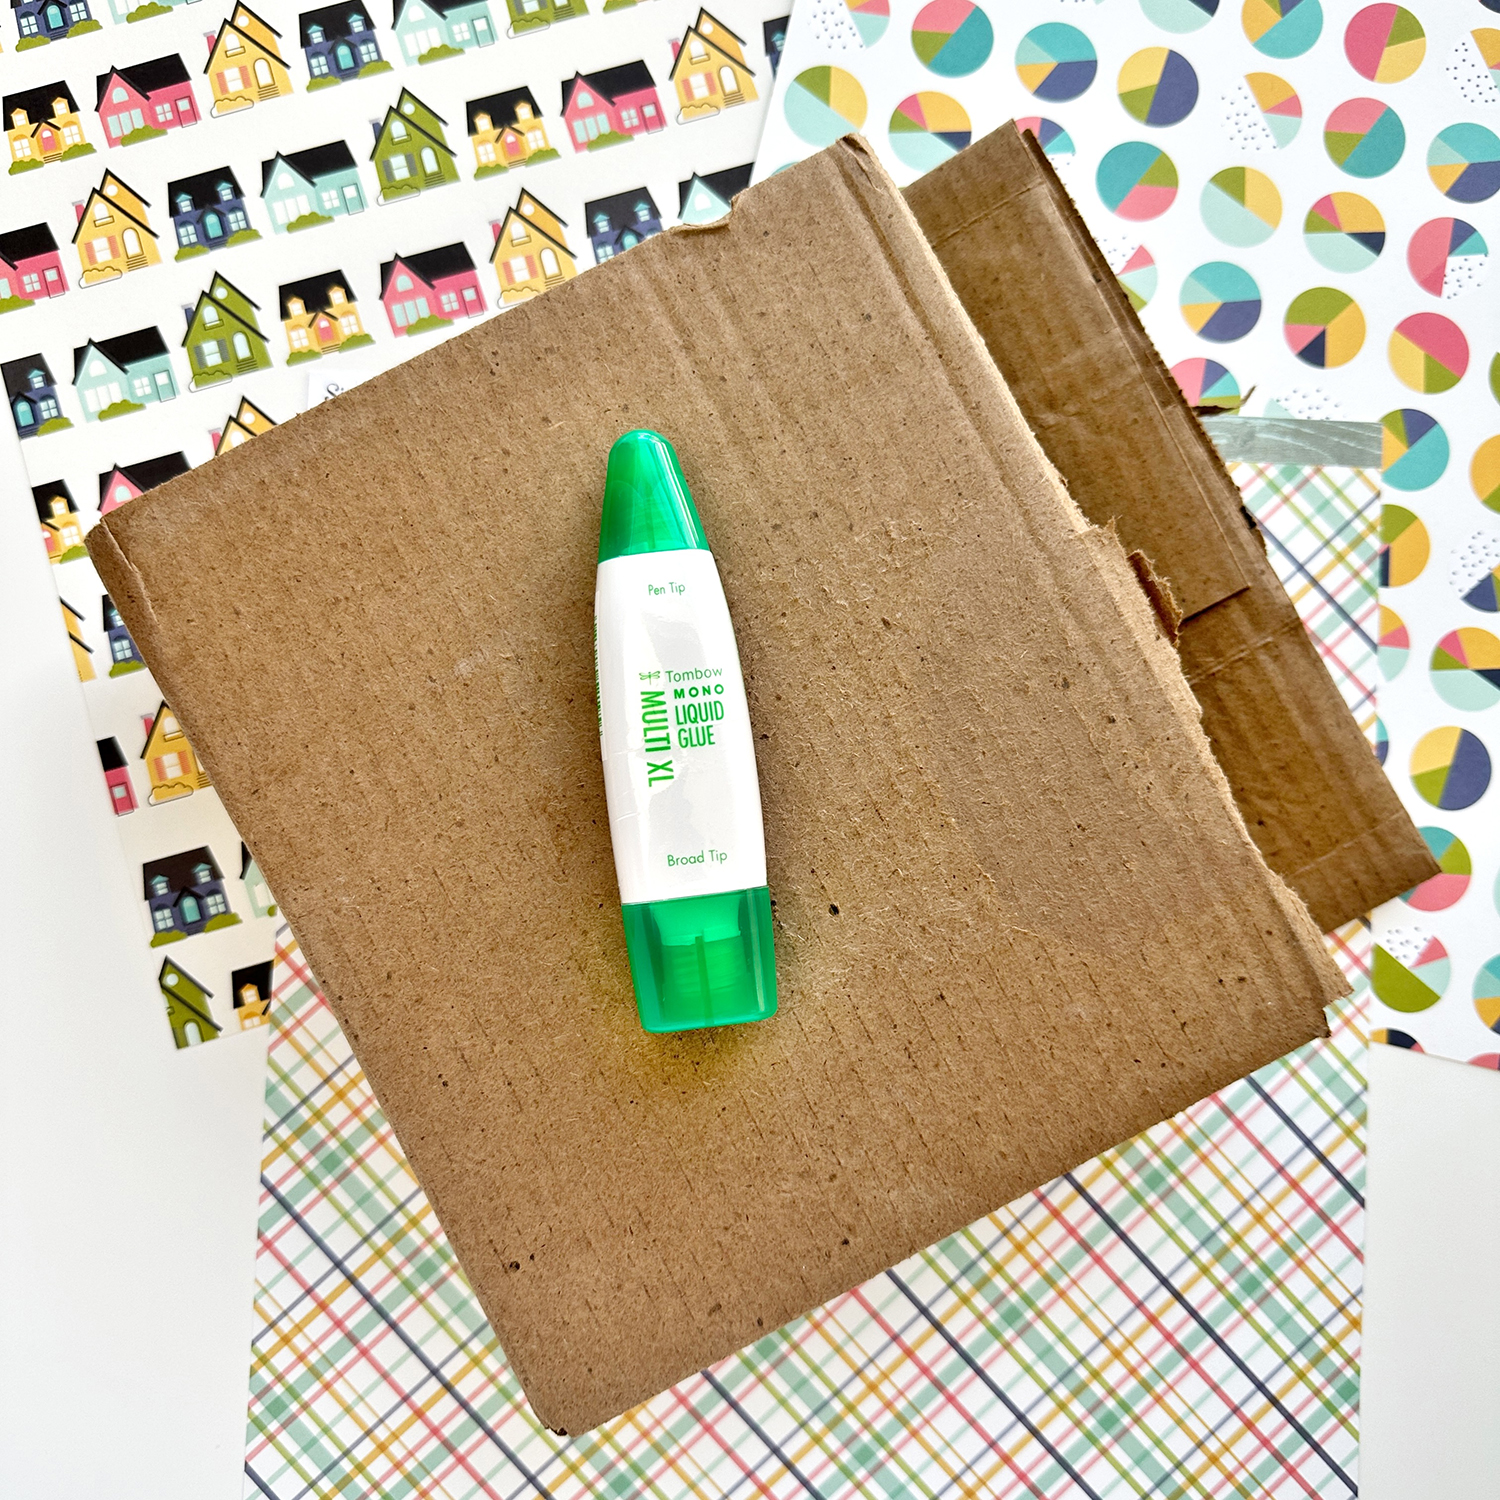 When this box arrived, the shape inspired me to create a book decoration. The first step is to cut the excess of the box and clean up the edges.  #tombow #recycled